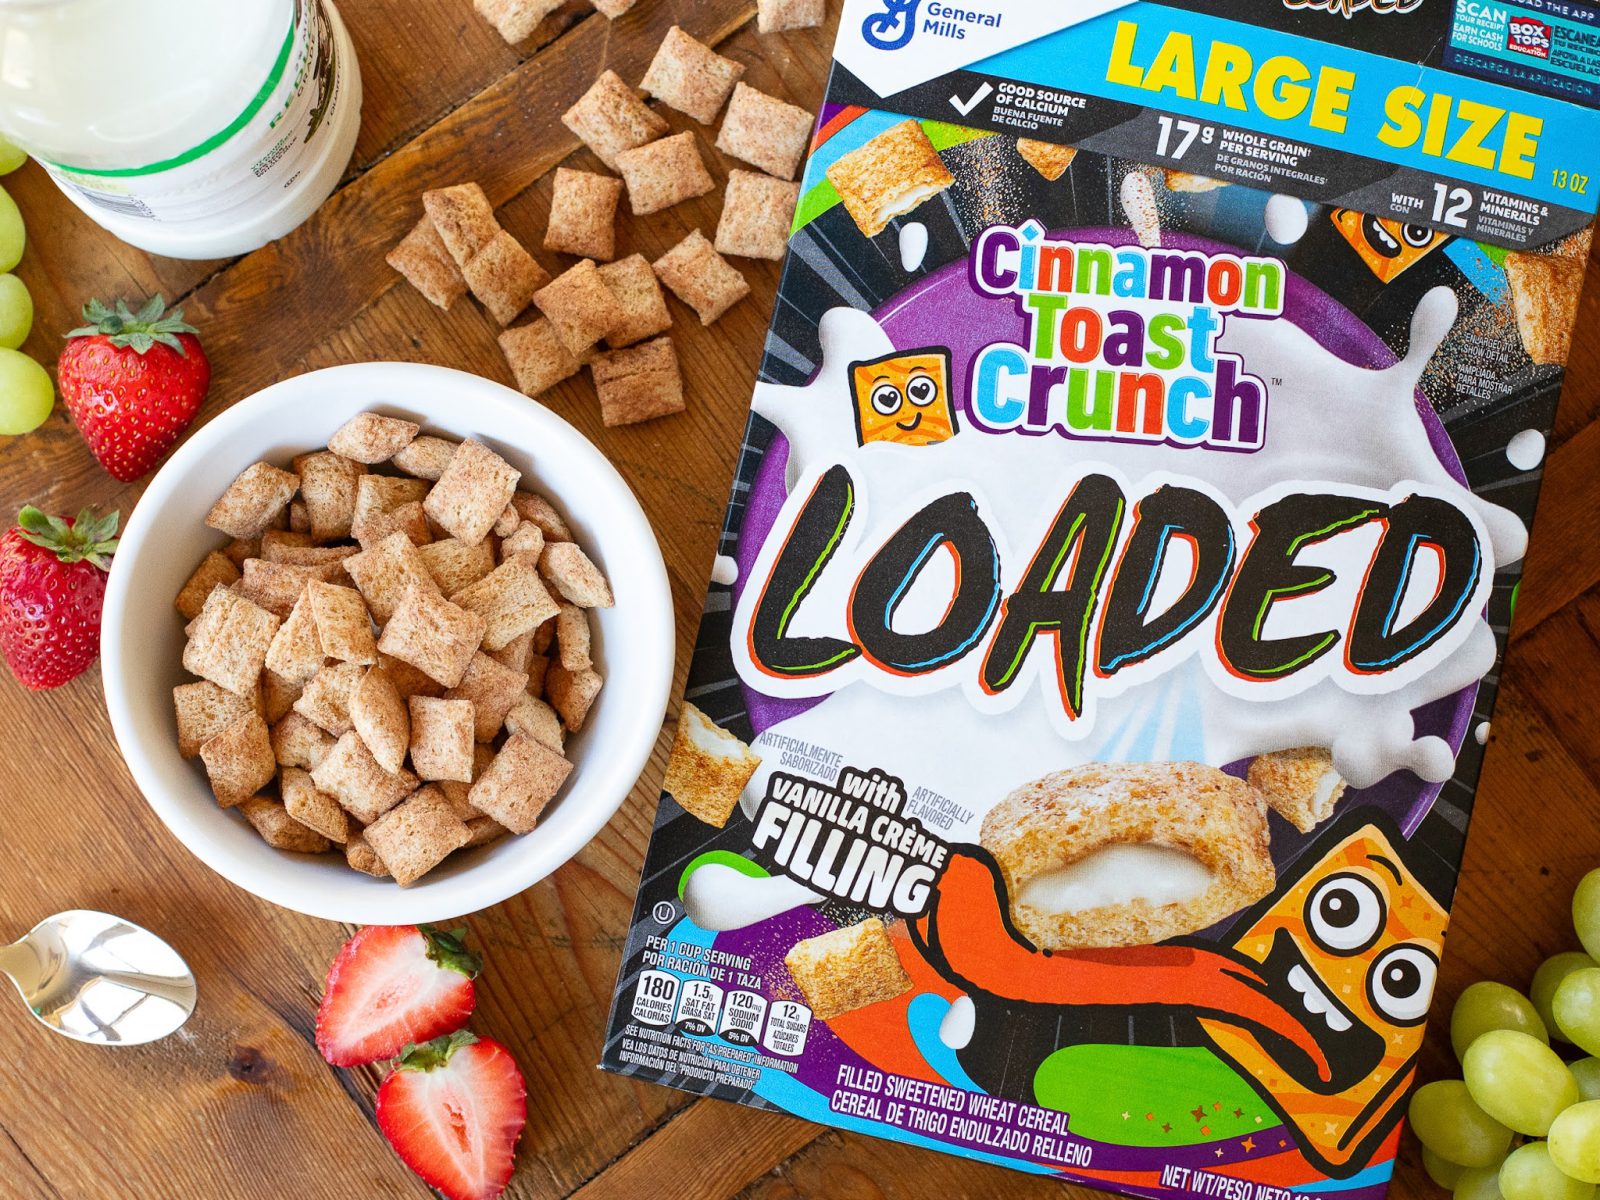 General Mills Loaded Cereal Large Boxes As Low As FREE At Kroger